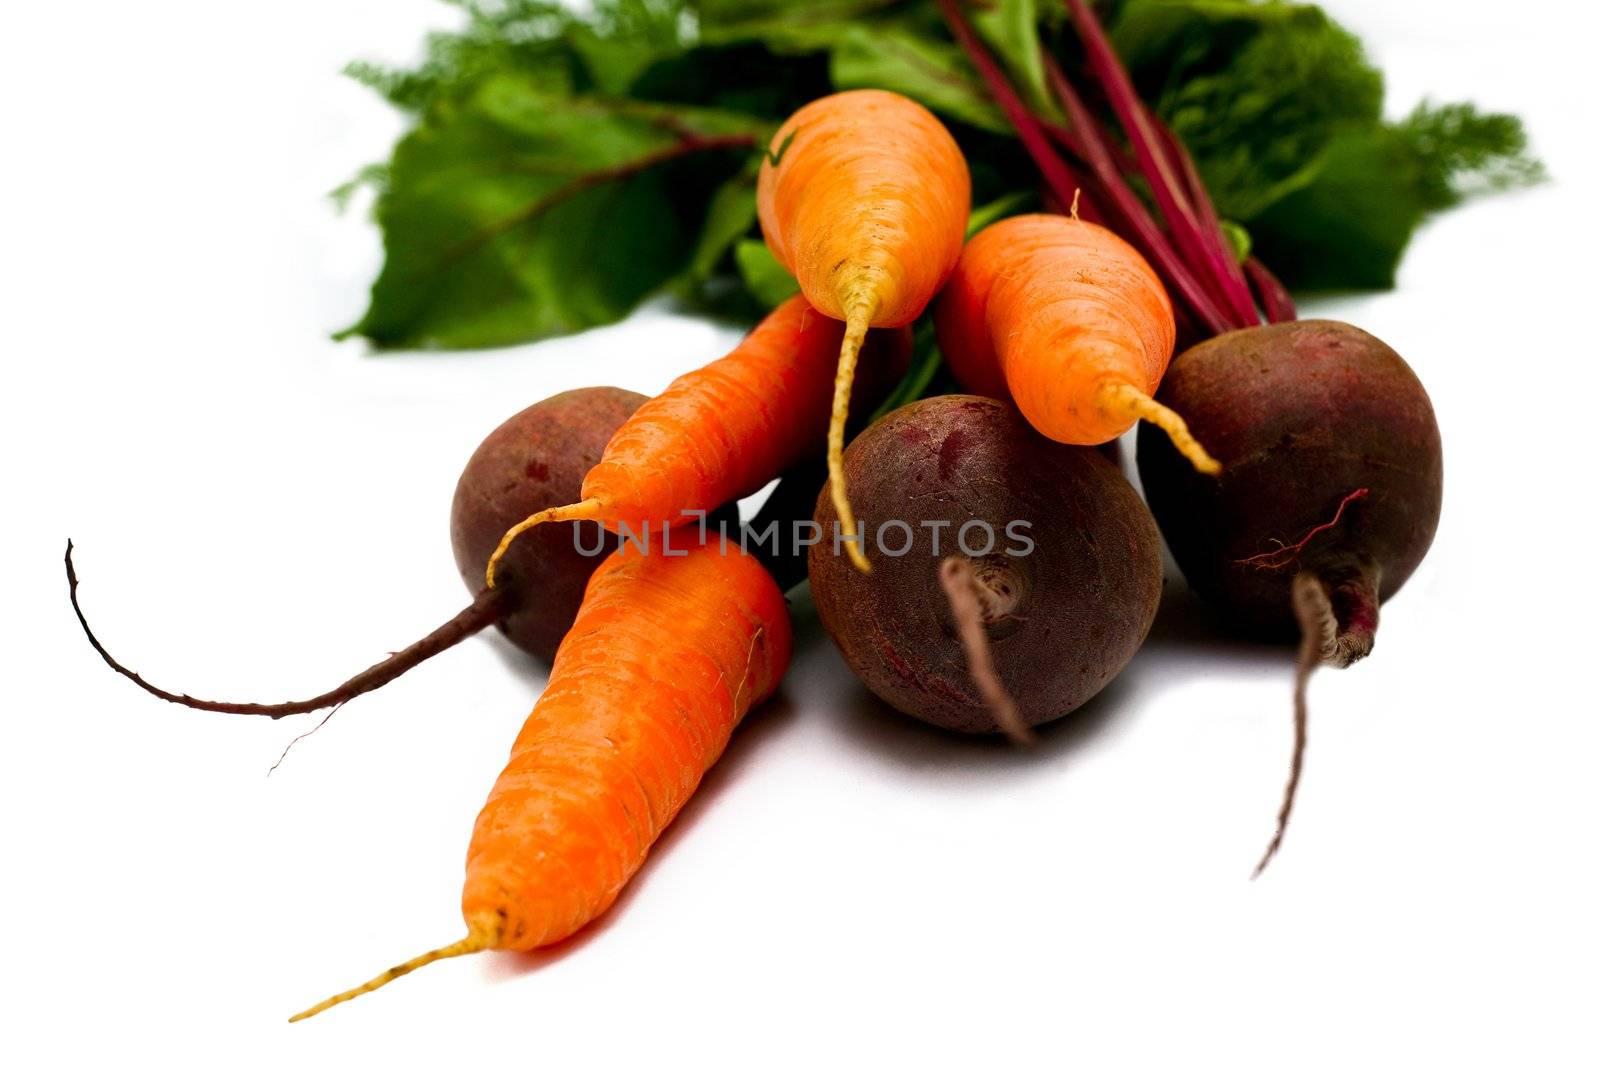 Carrot and beet by velkol